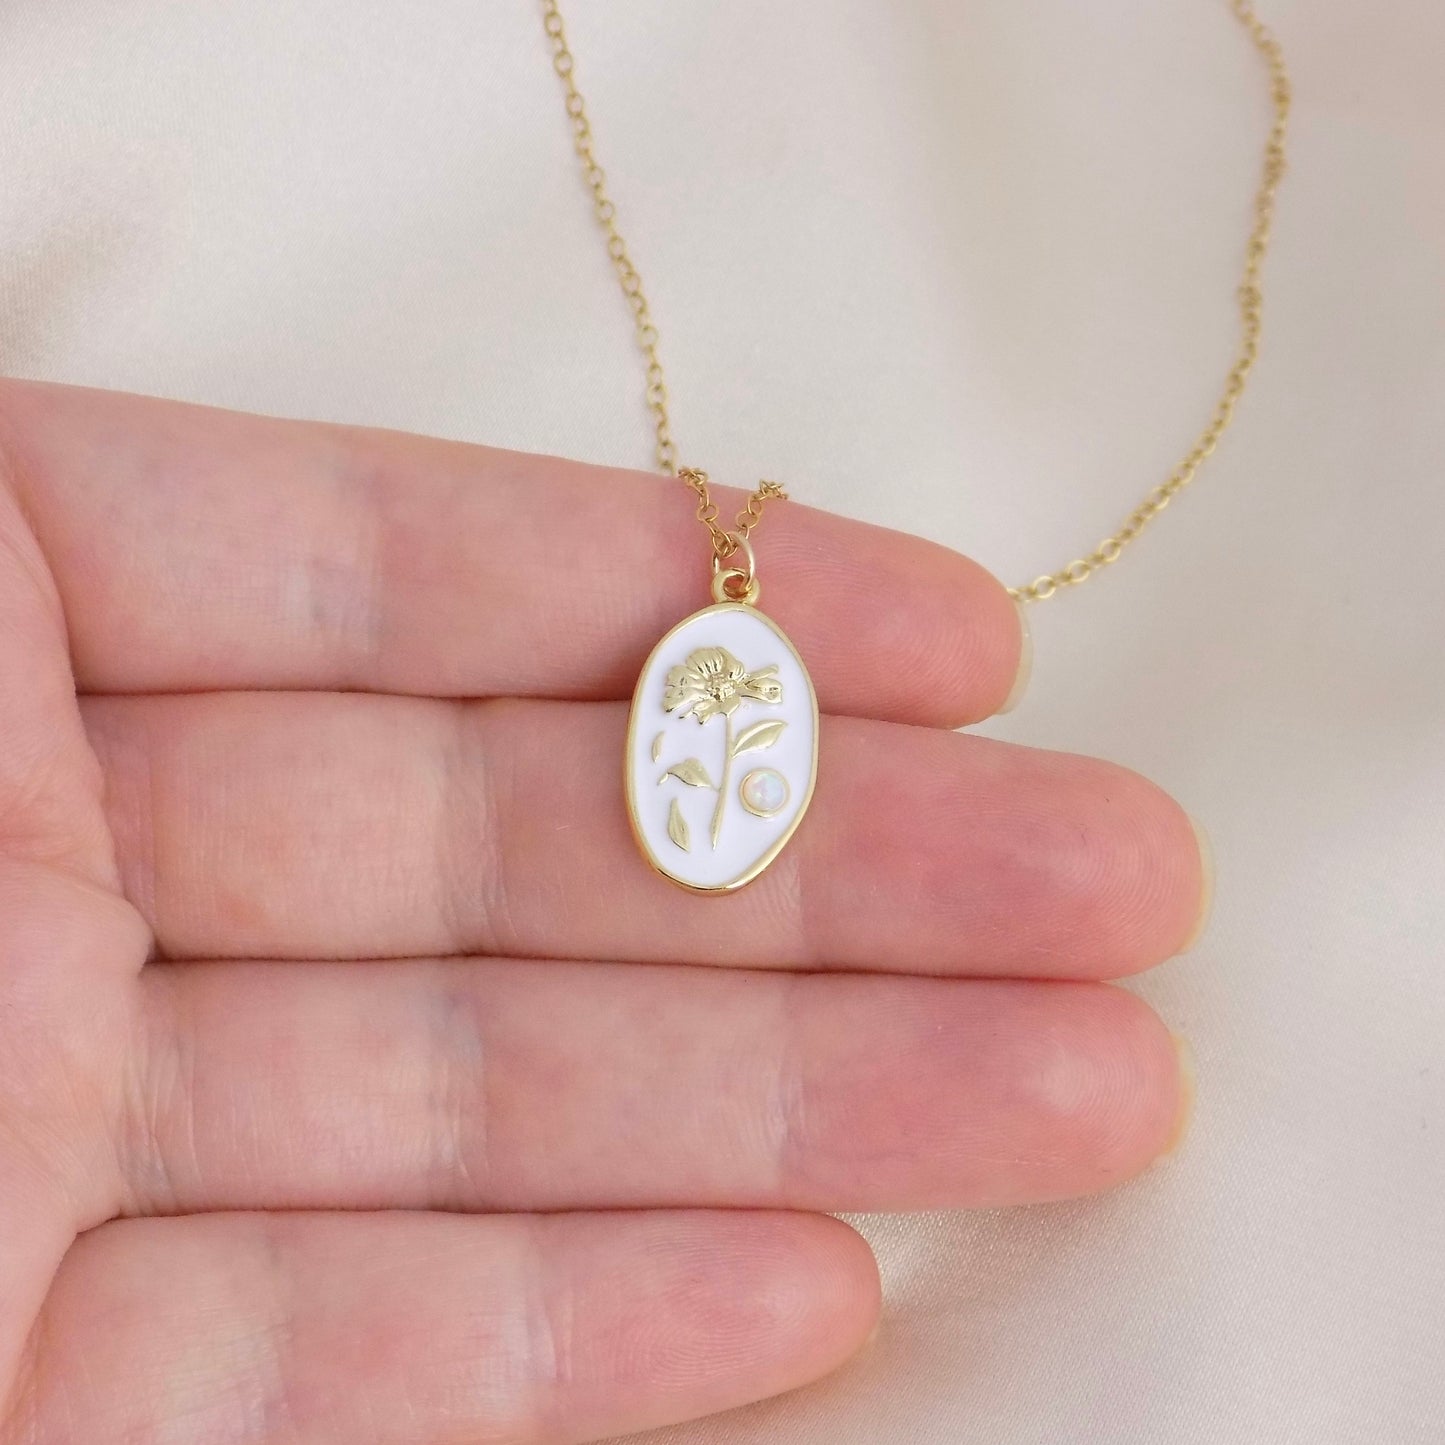 White Enamel Flower Necklace Opal Gold, Small Tag Necklace, Dainty Flower Charm Necklace, Trendy Necklace Gift For Her, M6-138